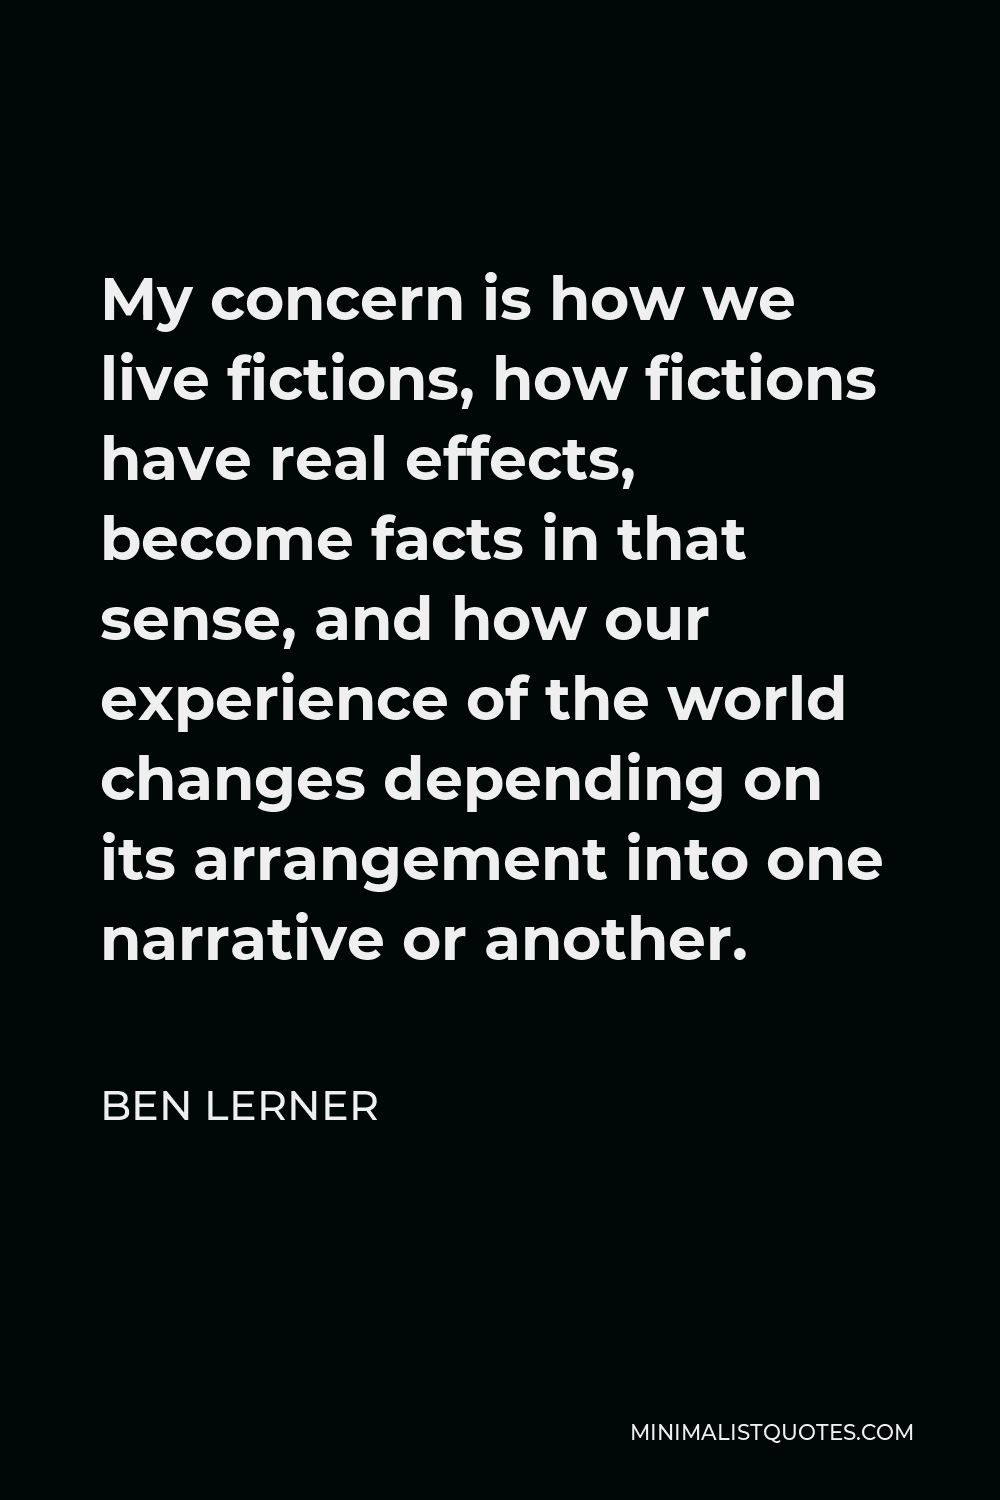 Ben Lerner Quote - My concern is how we live fictions, how fictions have real effects, become facts in that sense, and how our experience of the world changes depending on its arrangement into one narrative or another.